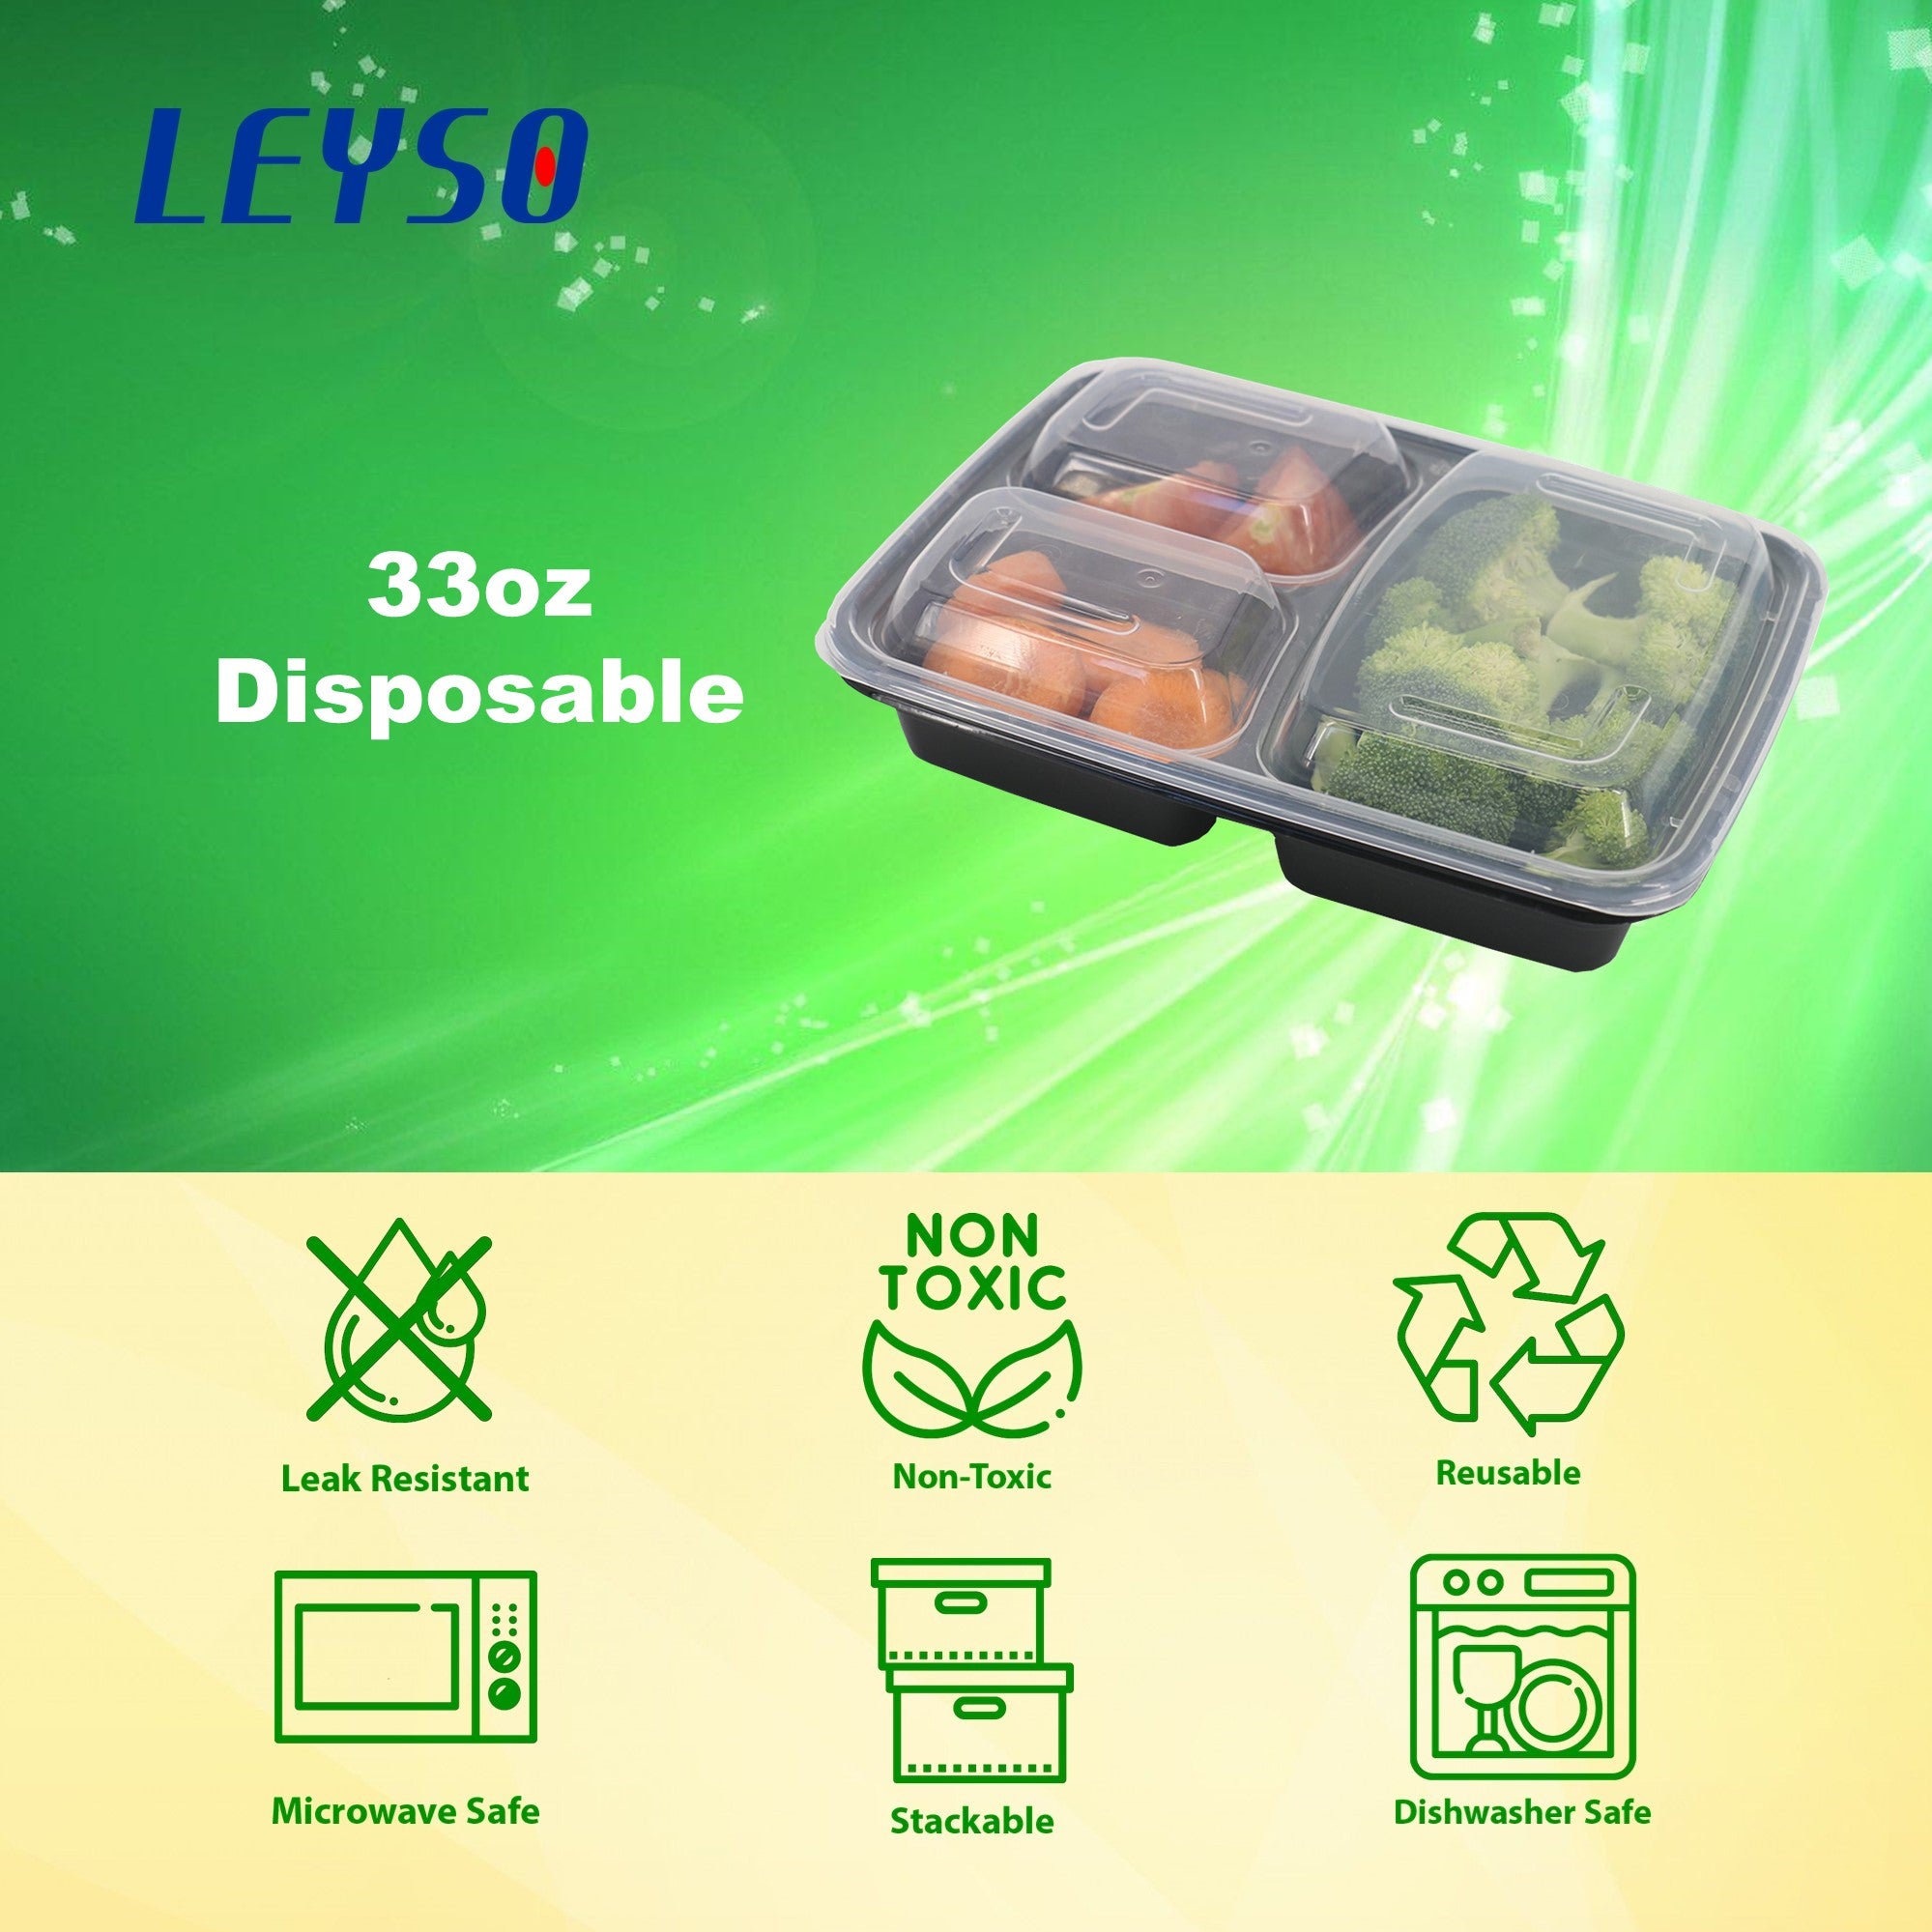 Leyso TO-JH333 33oz Three Compartments Bento Box Food Container with Clear Lid - Microwave, Dishwasher Safe